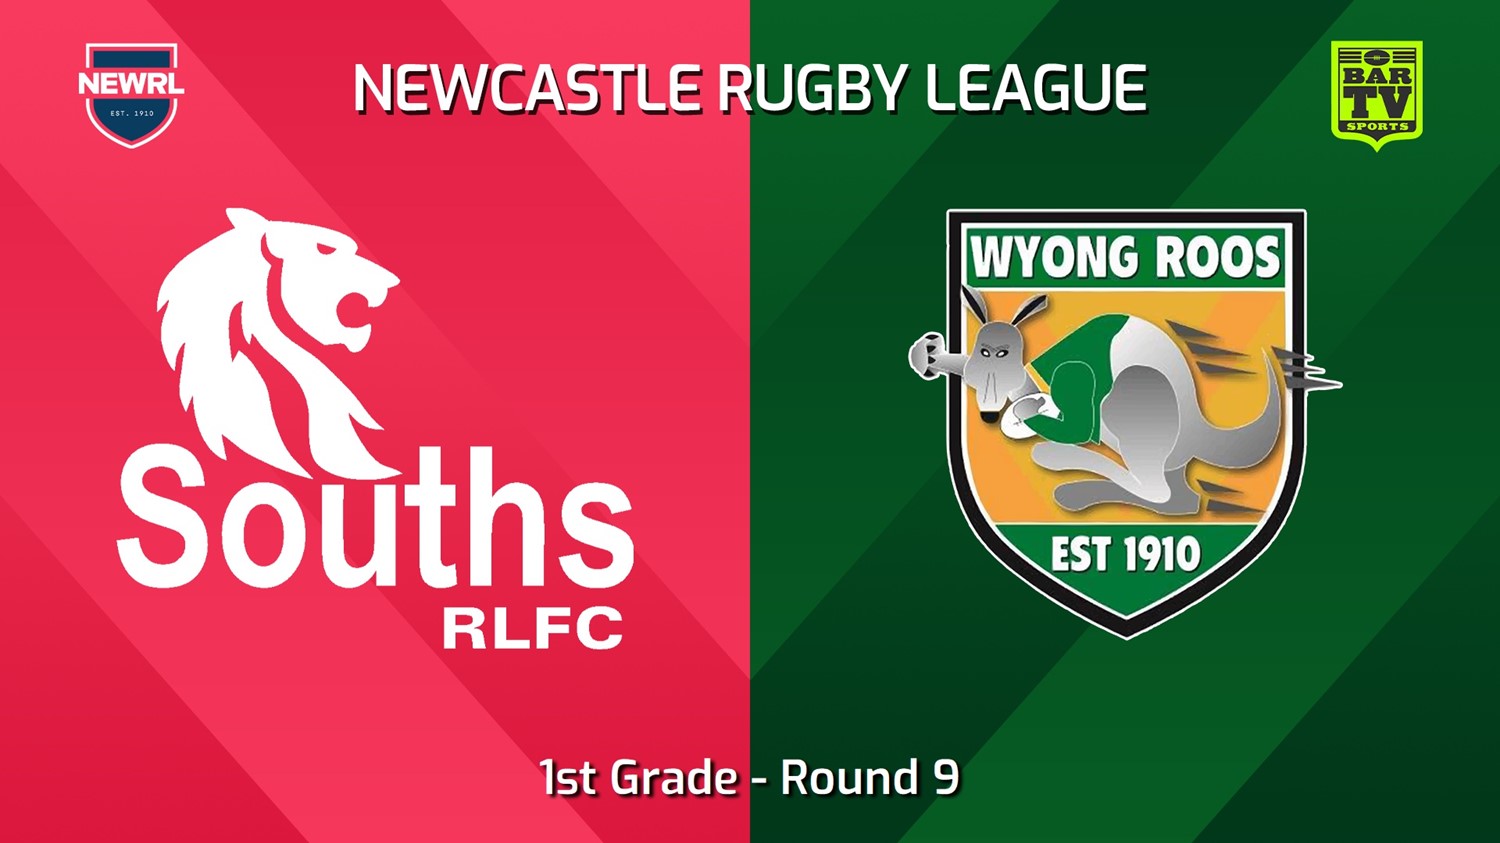 240616-video-Newcastle RL Round 9 - 1st Grade - South Newcastle Lions v Wyong Roos Slate Image